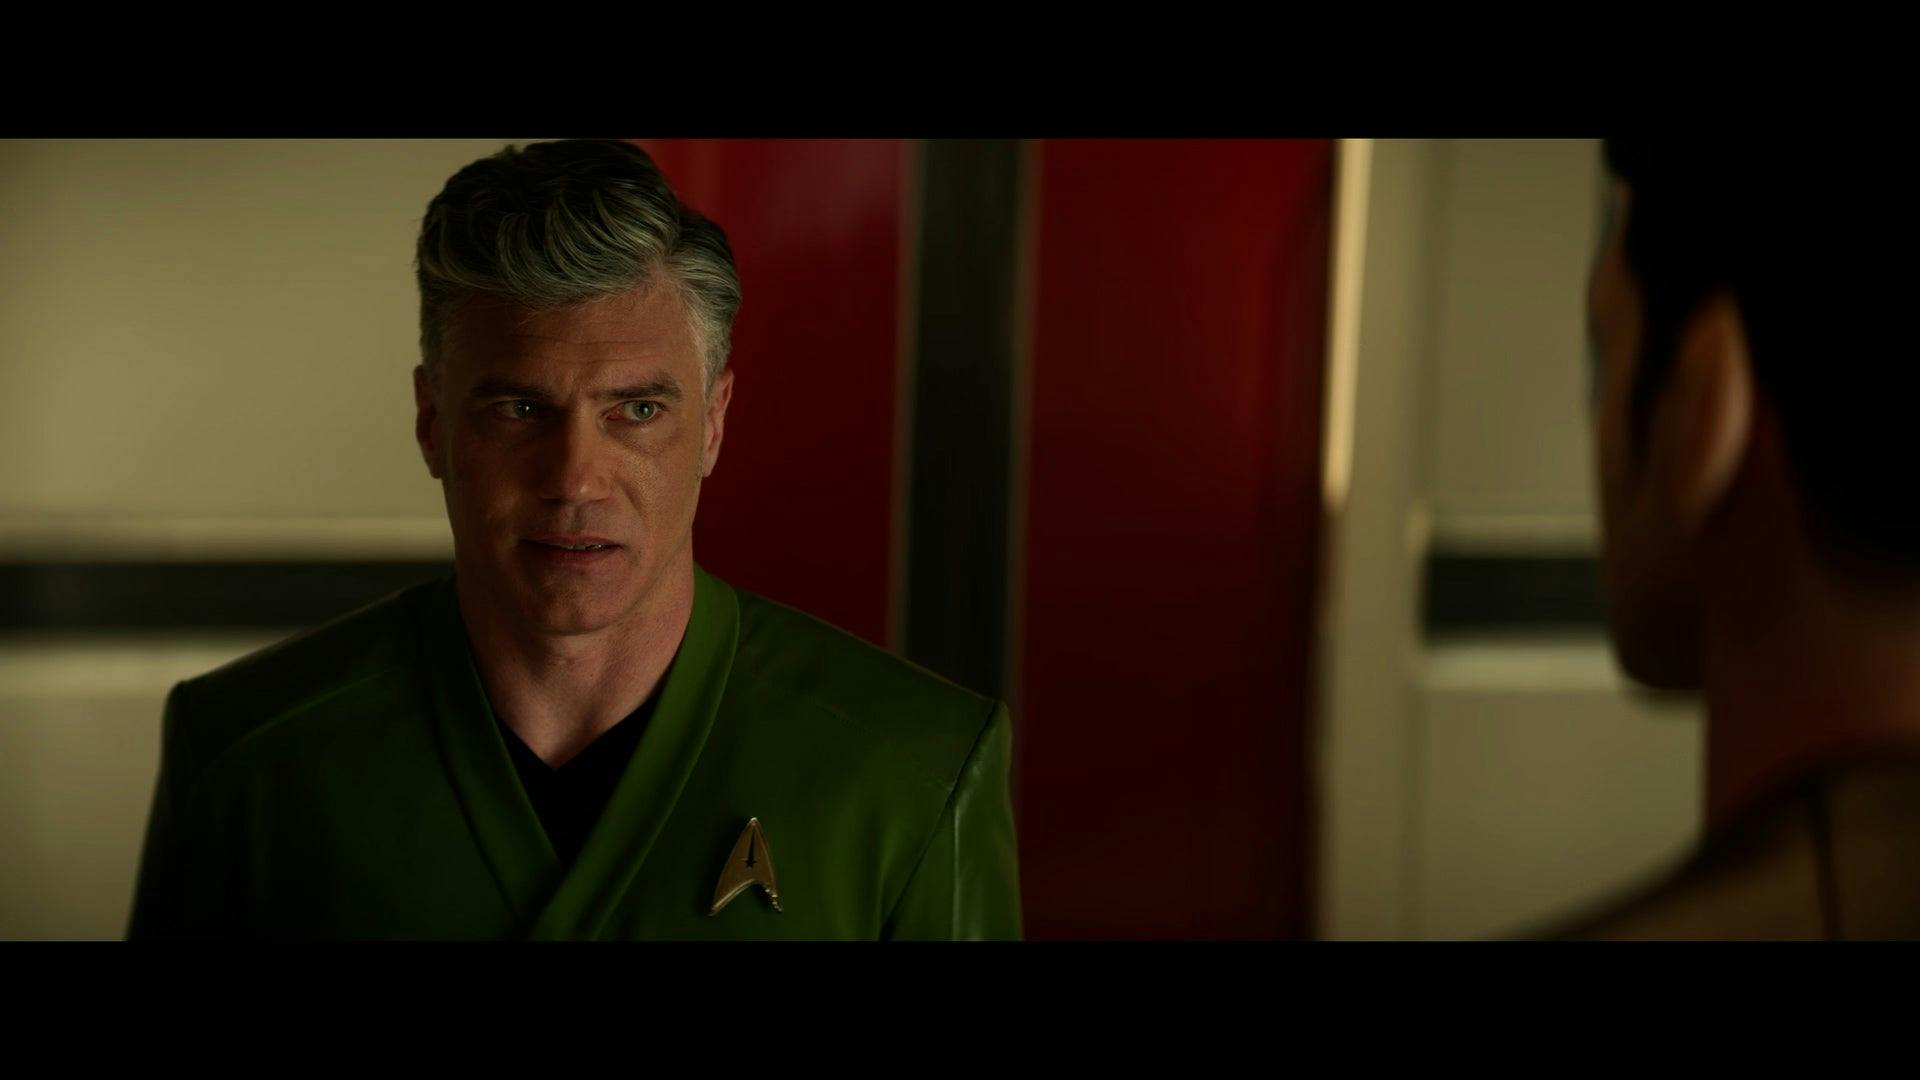 Anson Mount as Captain Pike talking to Ethan Peck as Spock